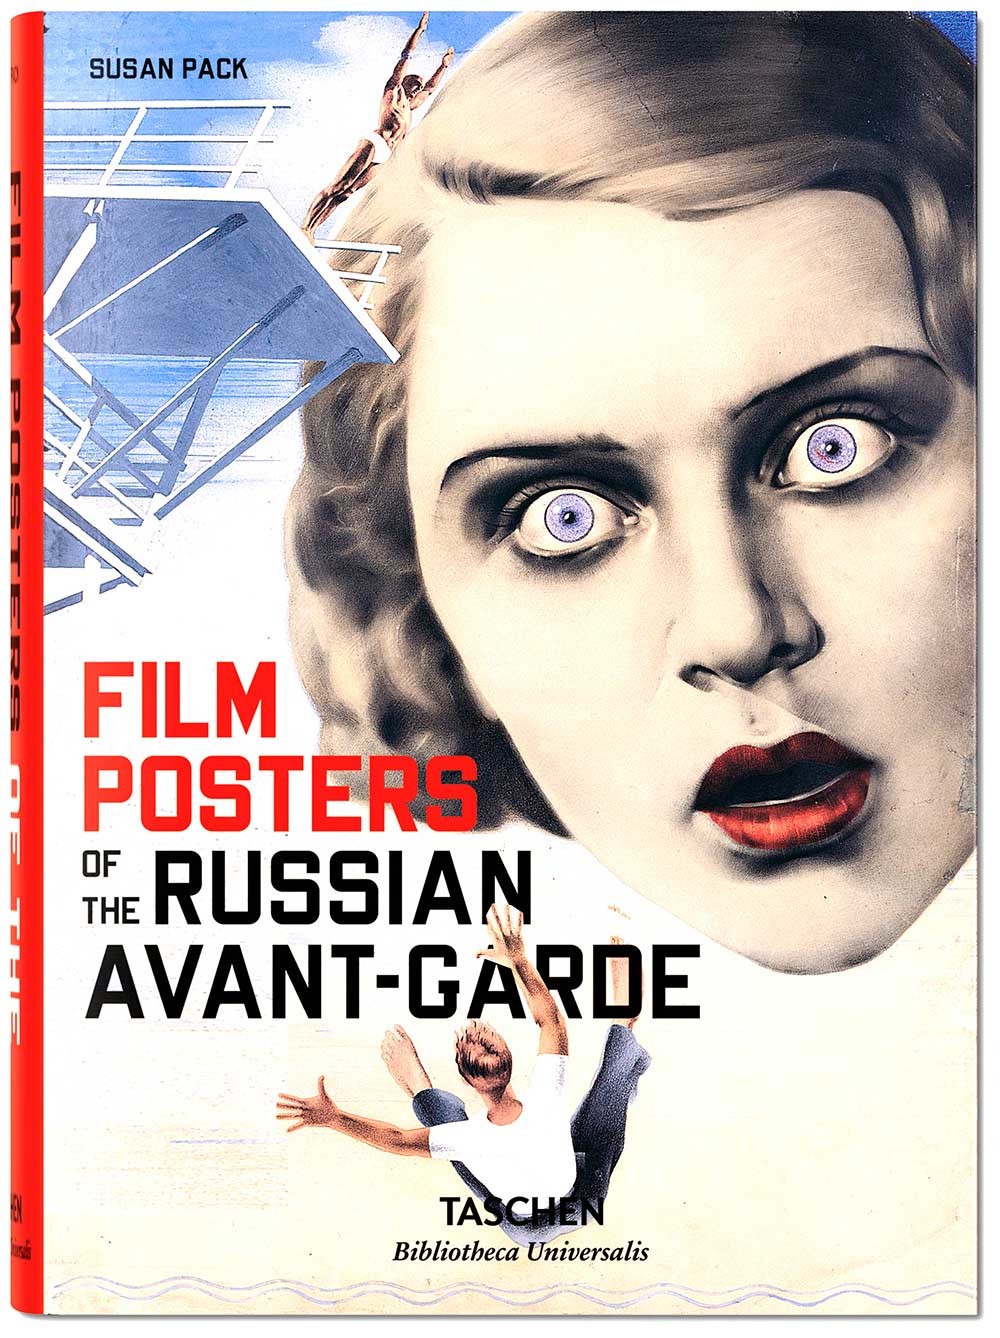 Book cover - Filmposters of the Russian Avant-Garde